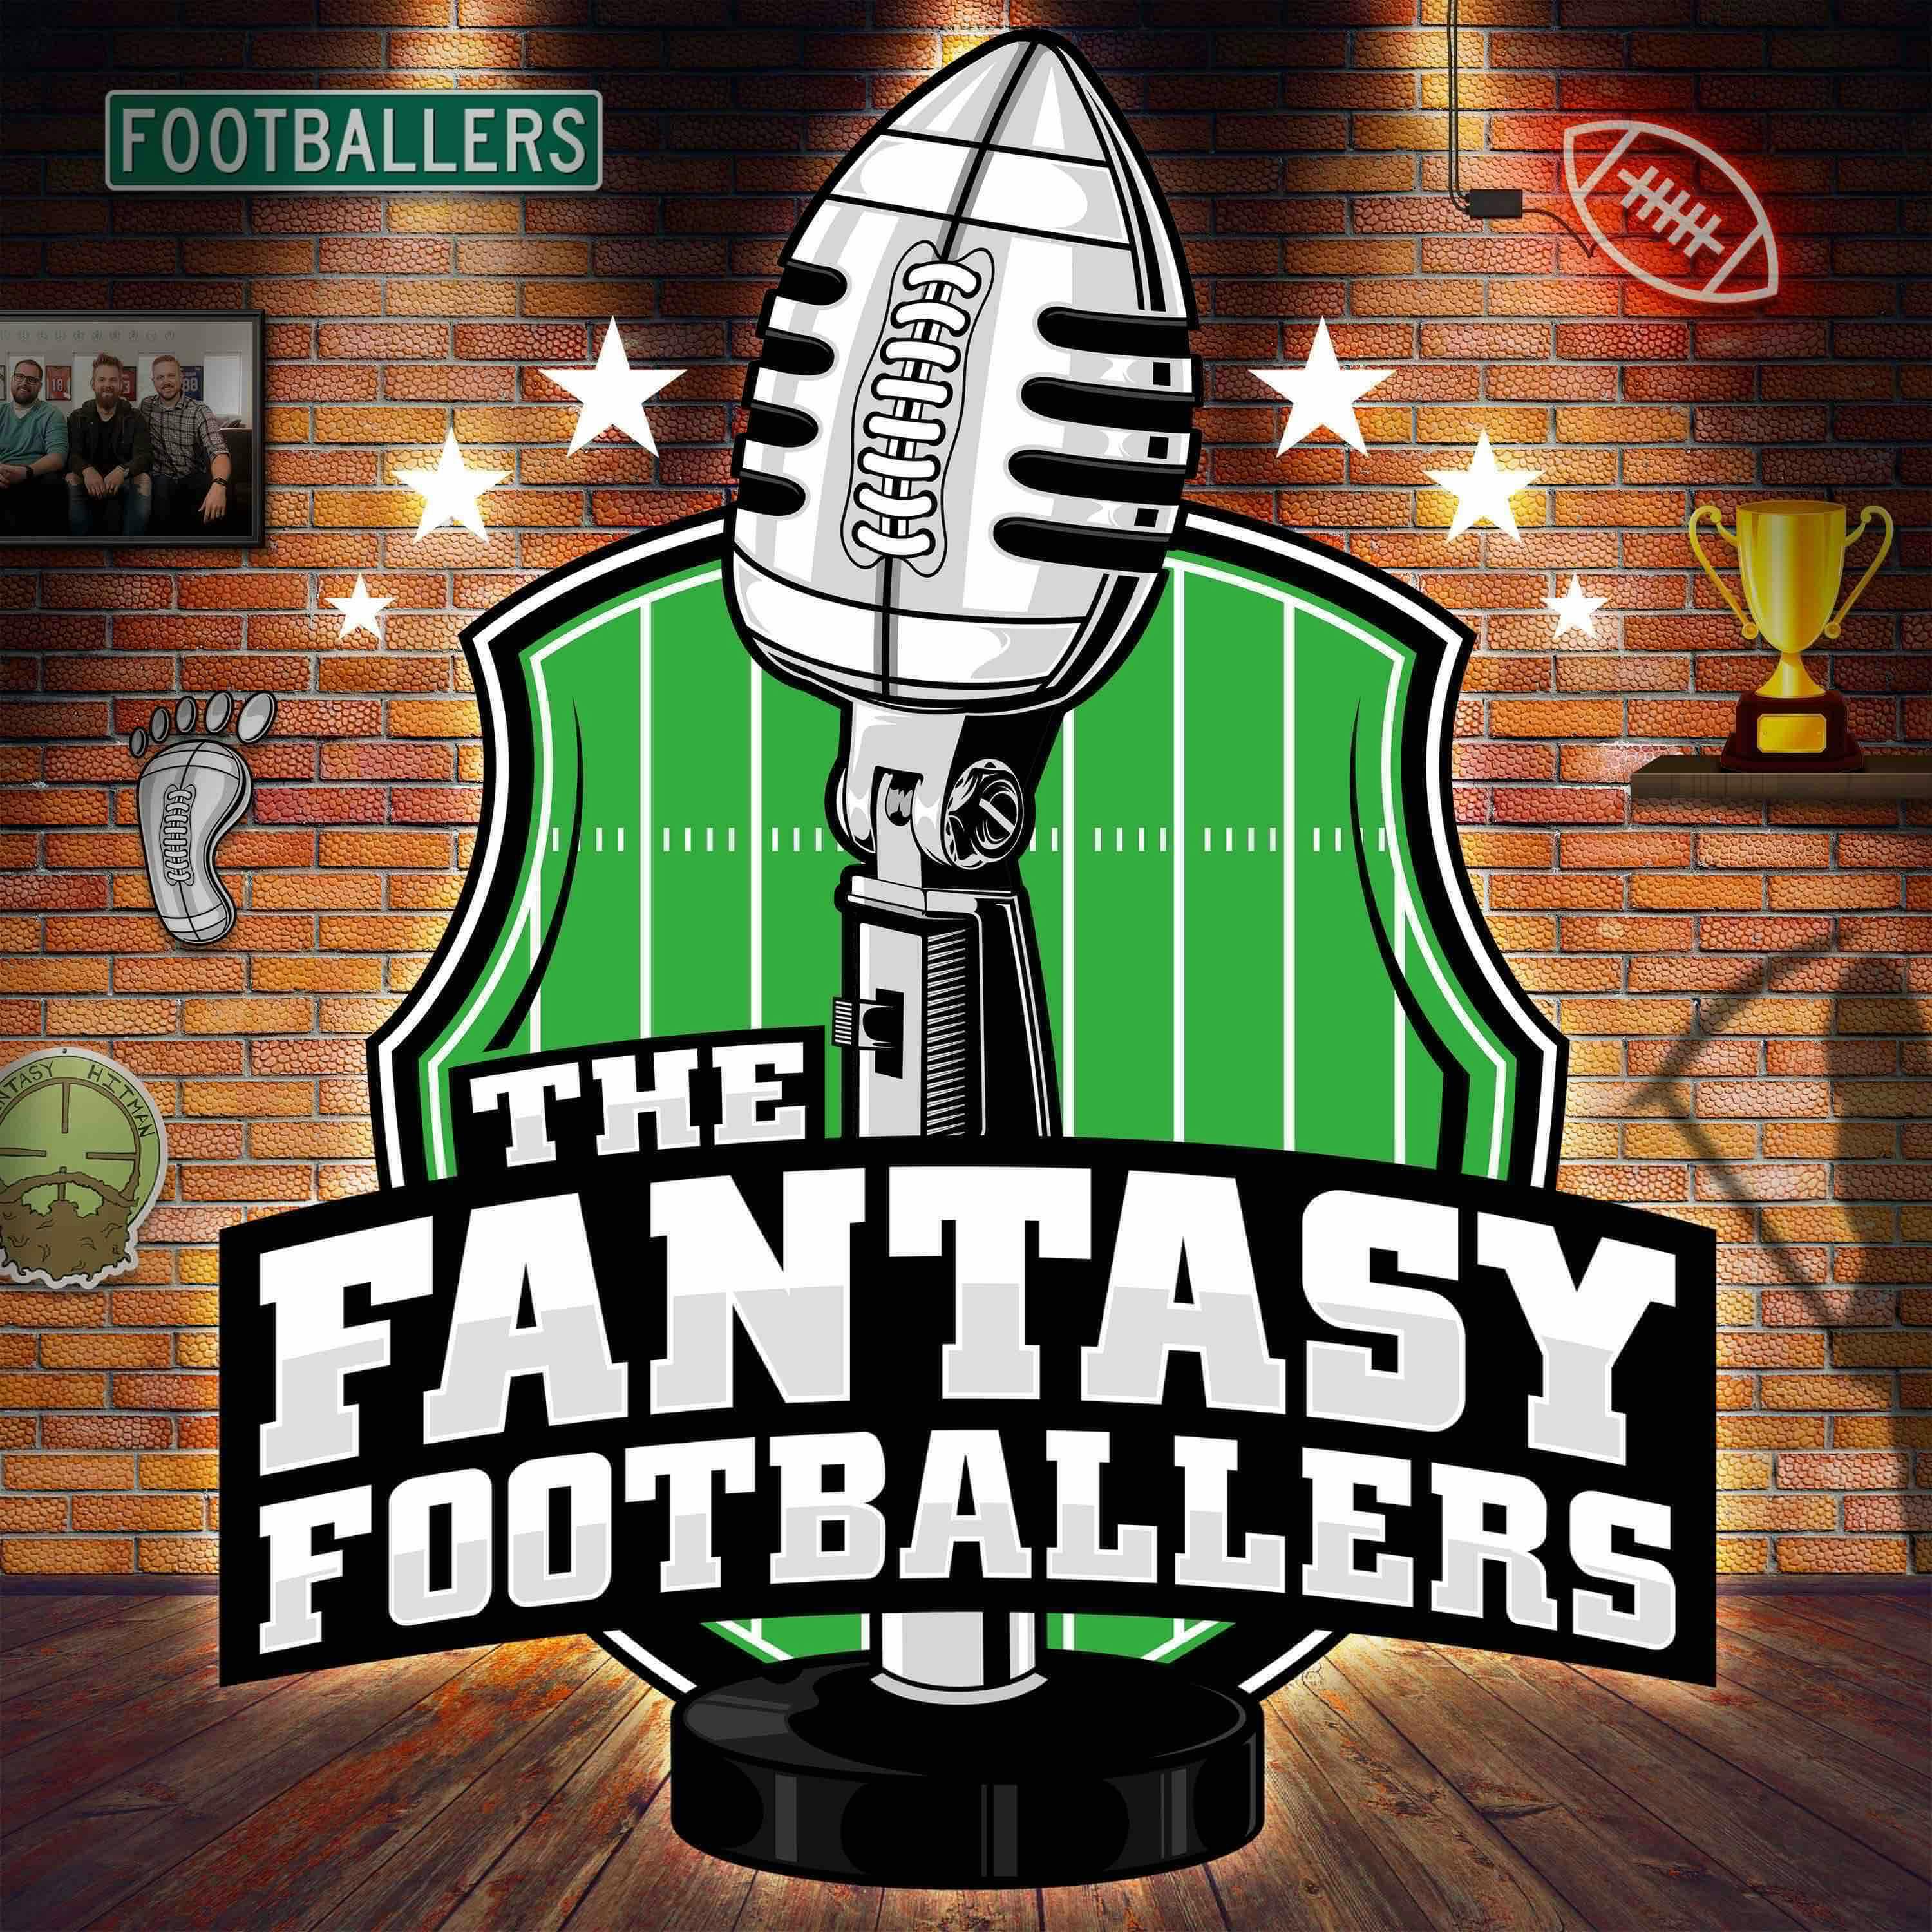 The TRUTH About Fantasy RBs: Part 1 + Playoff Reactions - Fantasy Football Podcast for 1/25